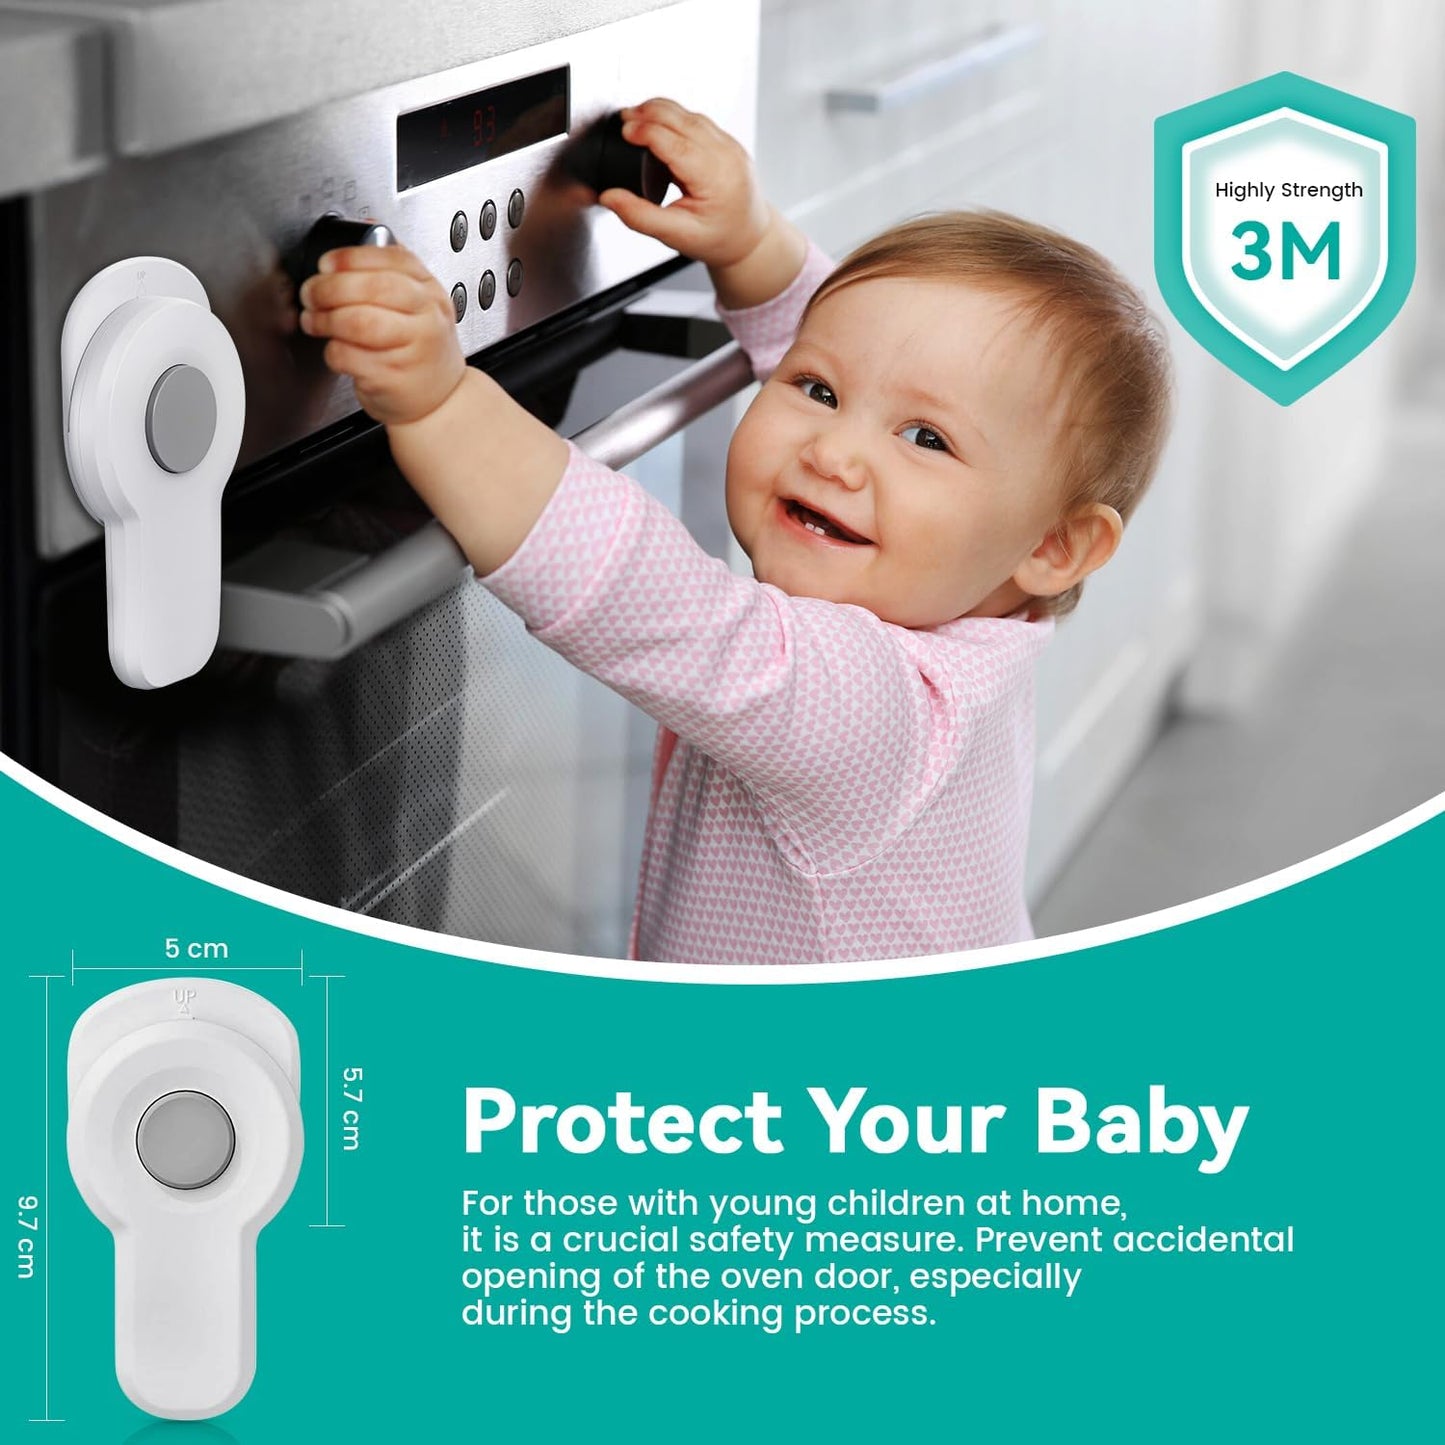 Oven Lock Child Safety, Oven Door Lock Child Safety Heat Resistant with 3M Adhesive, Easy to Install, Use Durable and Heat-Resistant Material, Durable Oven Baby Proofing for Kitchen (White)